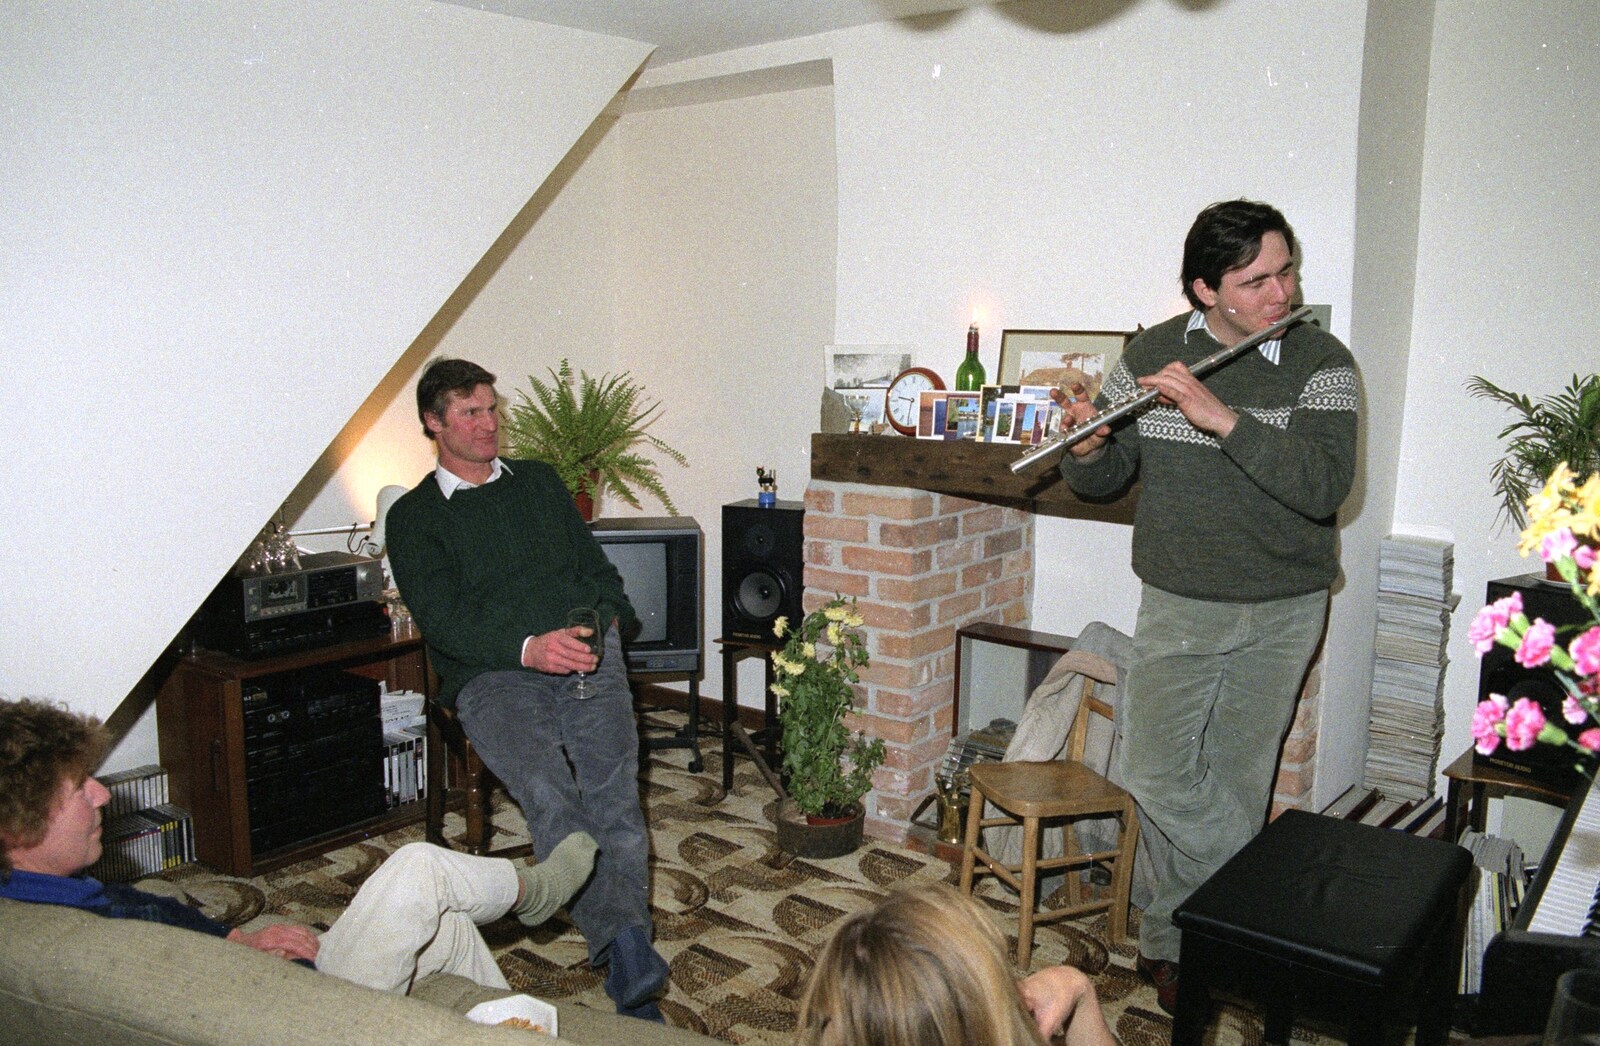 Geoff watches as David plays flute from Sledging on the Common and Some Music, Stuston, Suffolk - 5th February 1991